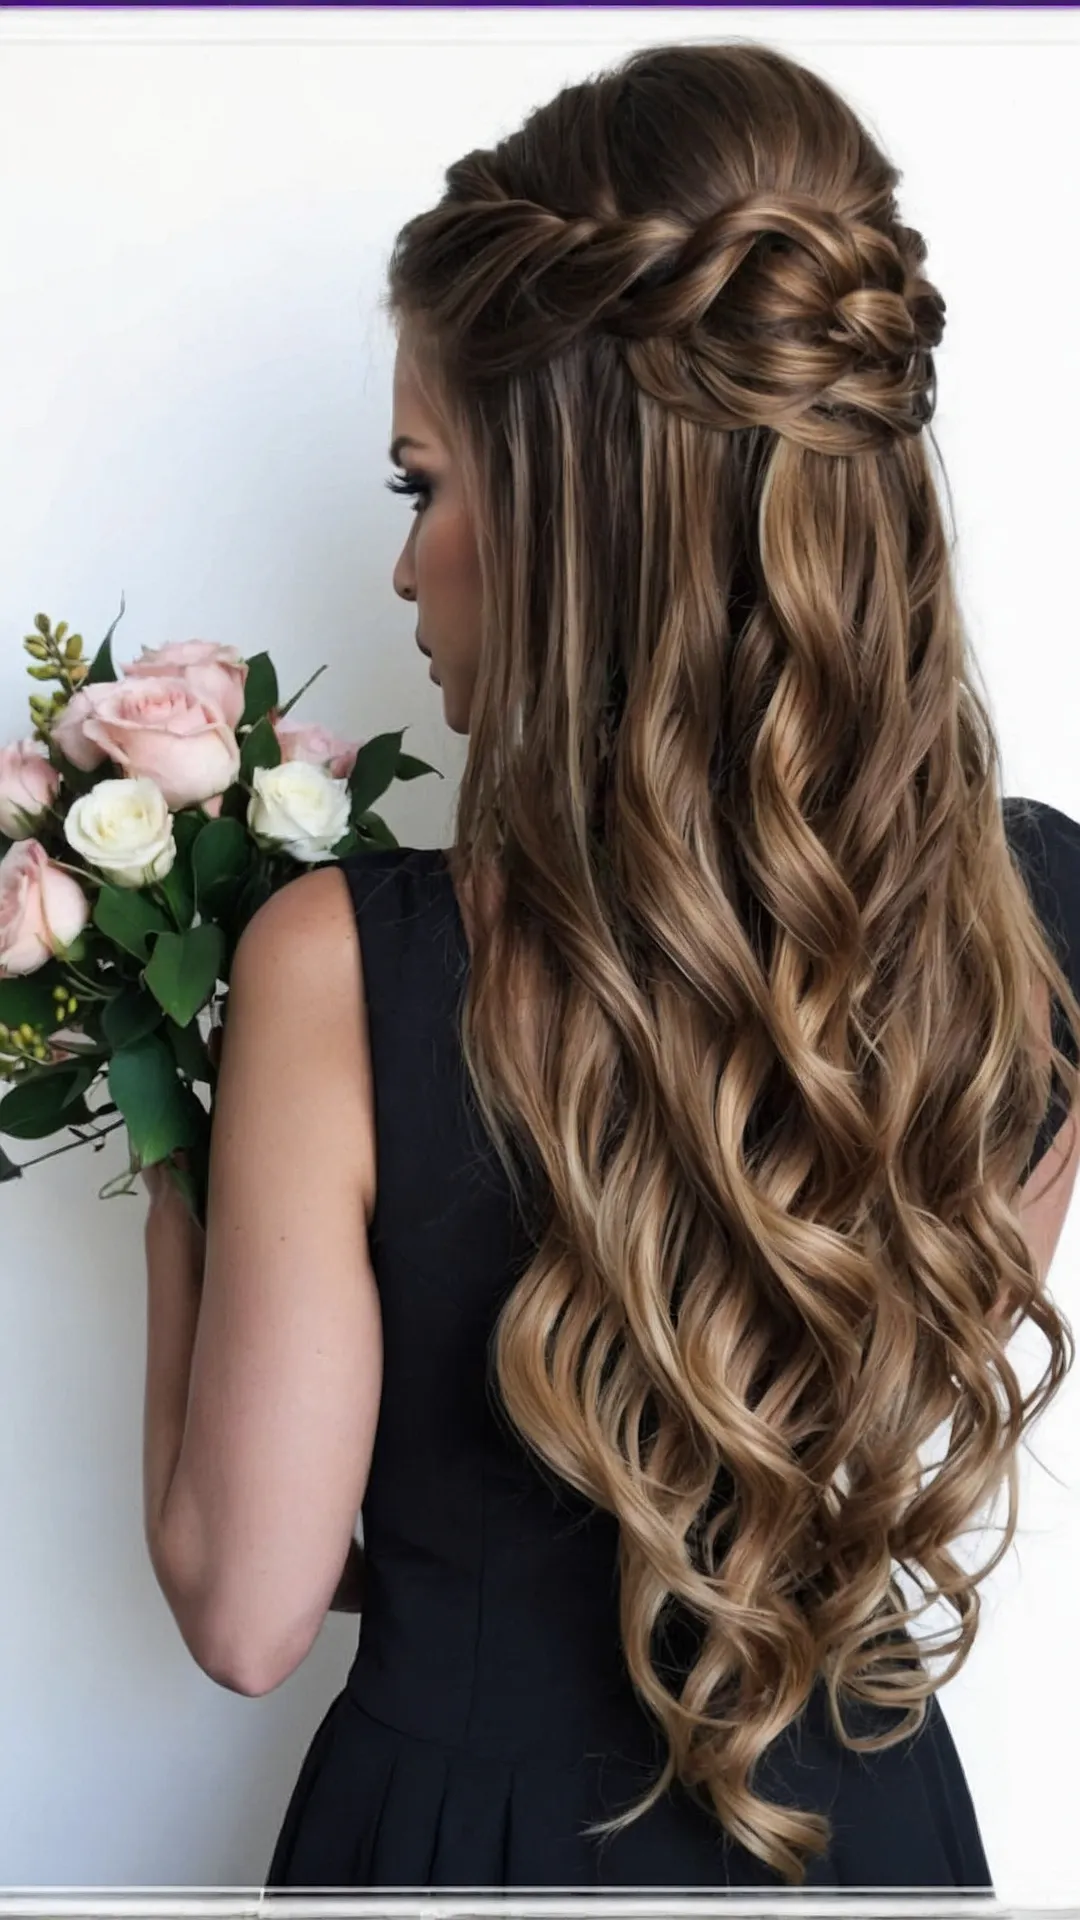 Serene Silhouettes: Long Hair Prom Hairstyle Visions